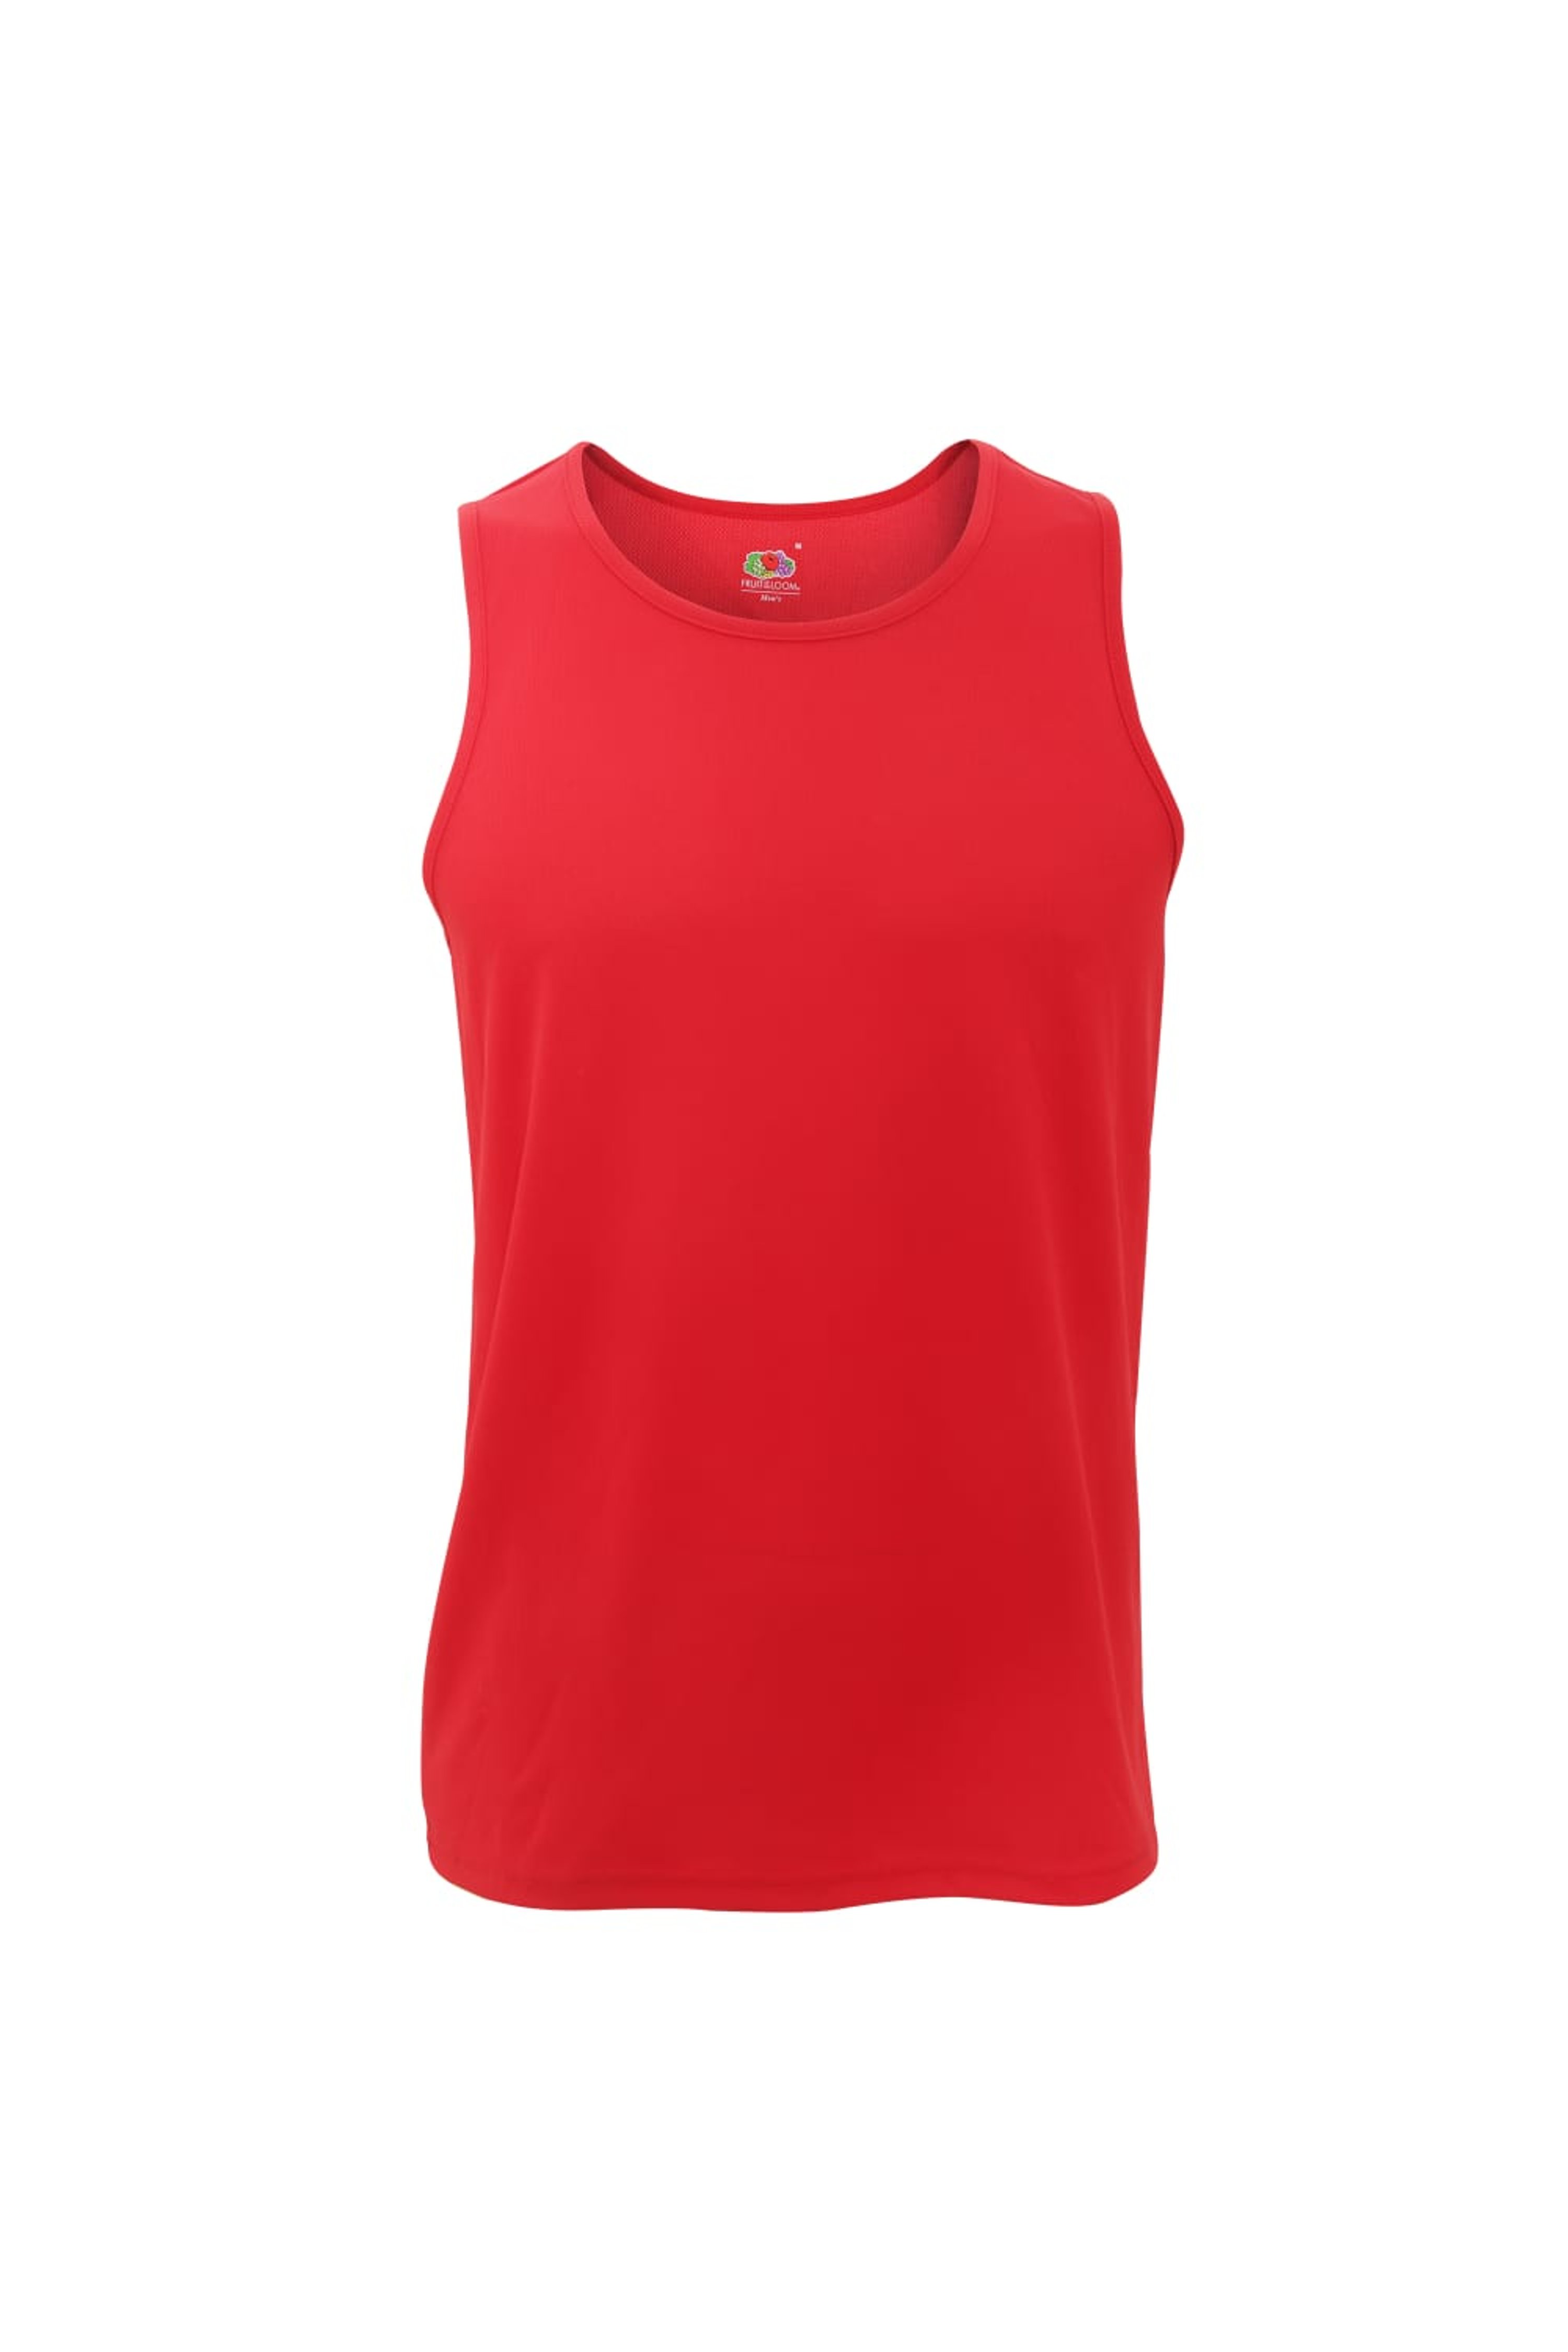 FRUIT OF THE LOOM FRUIT OF THE LOOM FRUIT OF THE LOOM MENS MOISTURE WICKING PERFORMANCE VEST TOP (RED)